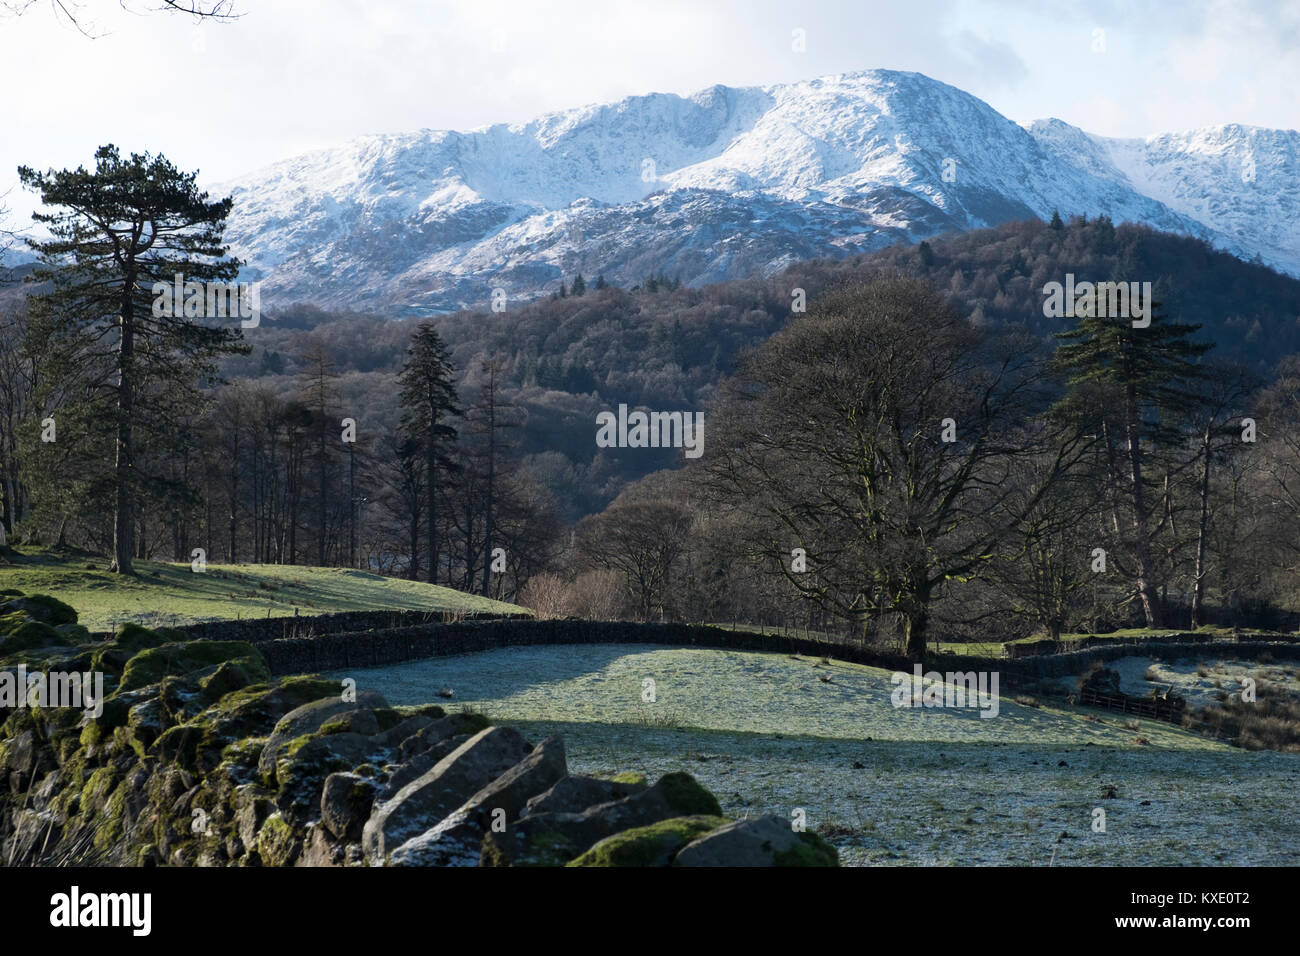 Wetherlam in snow from near Loughrigg, Lake District, England Stock Photo